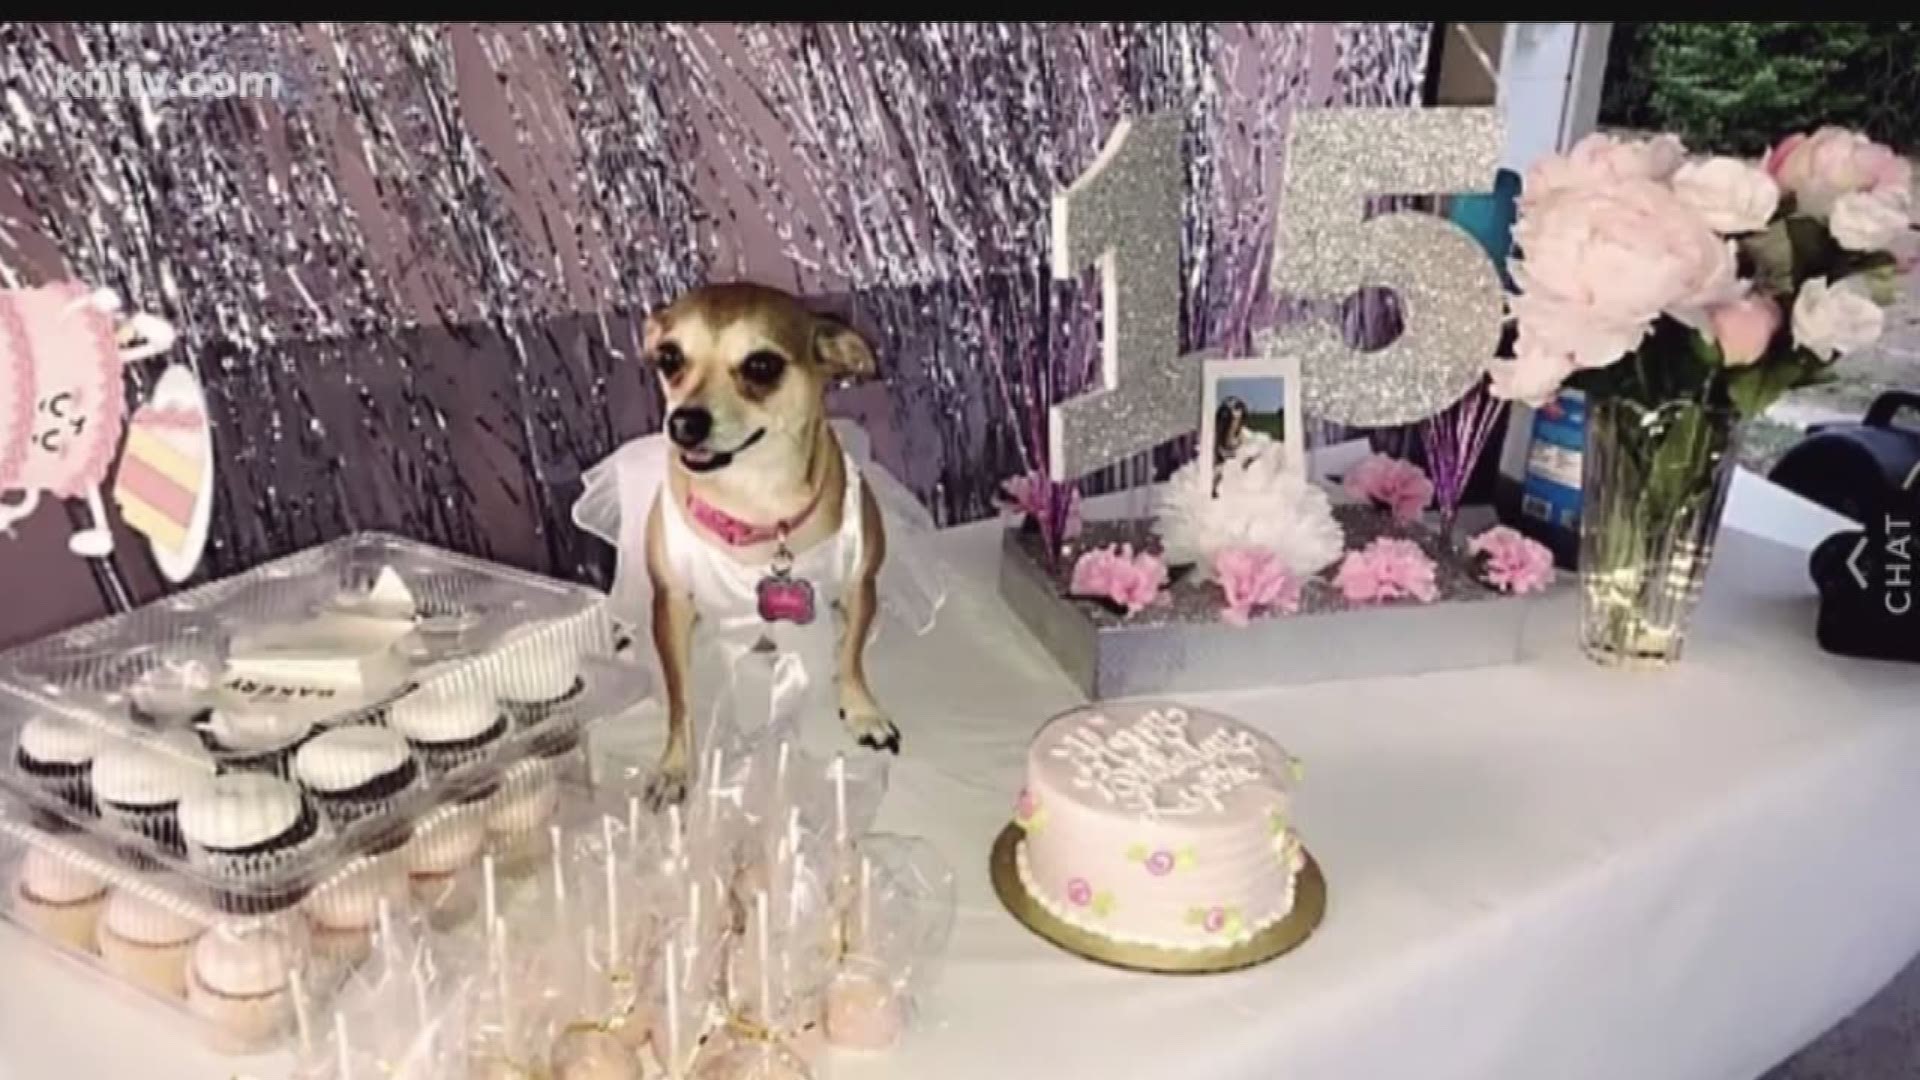 Lupita Conchita received a birthday party by her owner Miranda Sanchez while her cousin Megan shared the photos on Twitter of the pink party.